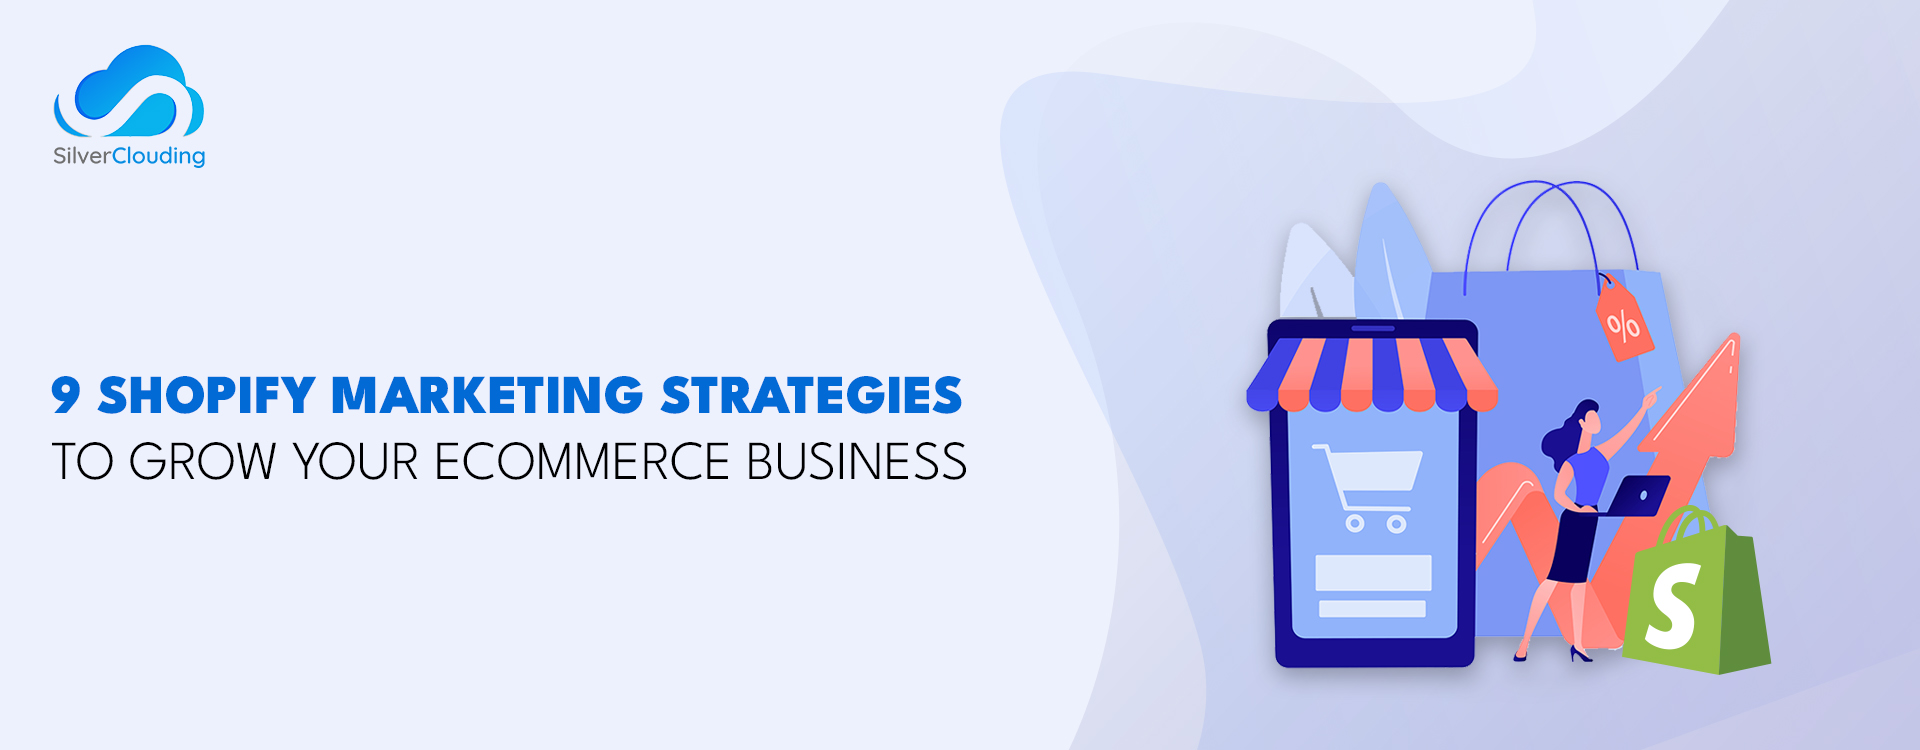 9 Shopify Marketing Strategies to Grow Your eCommerce Business